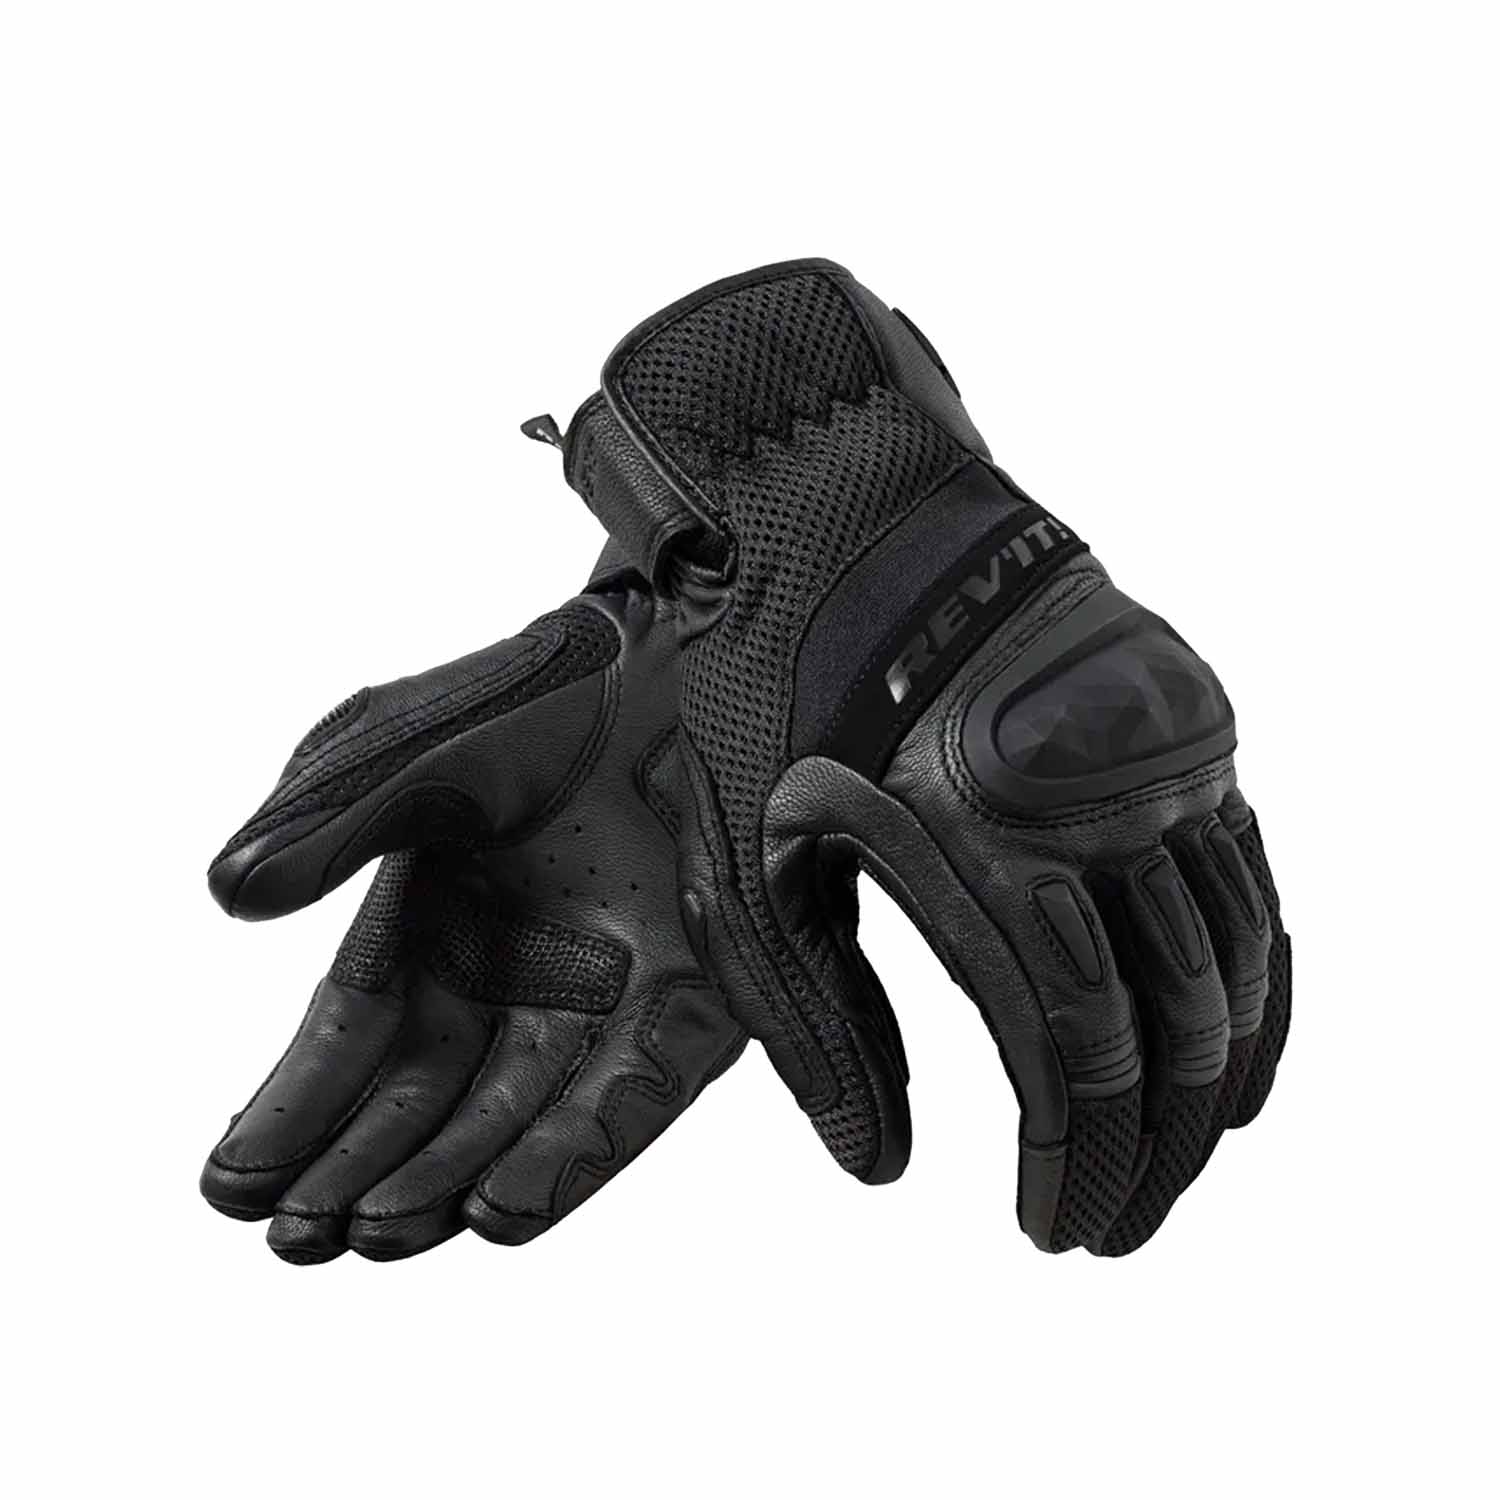 Image of REV'IT! Dirt 4 Gloves Black Size XS ID 8700001383370